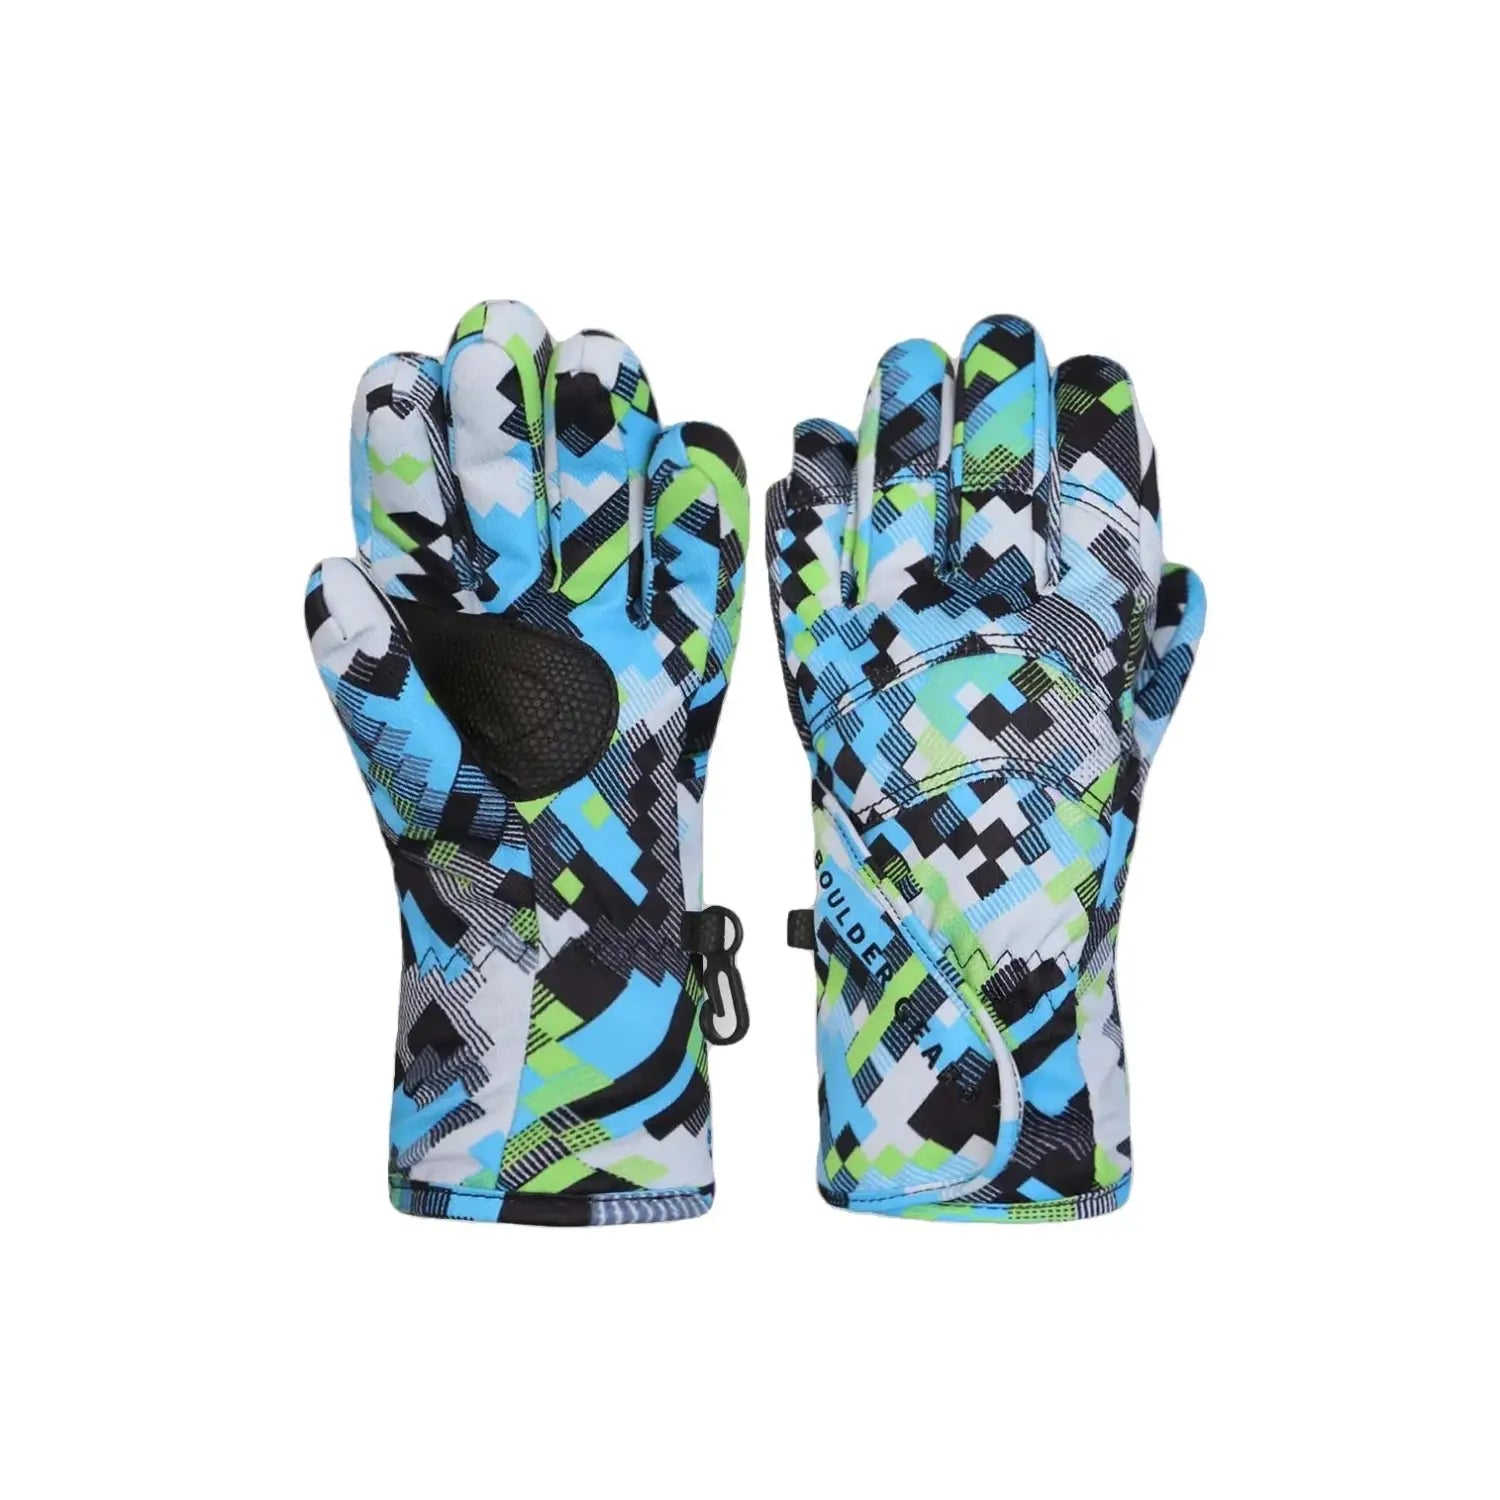 Boulder Gear K's Flurry Glove, Aqua Stacked, front and back view